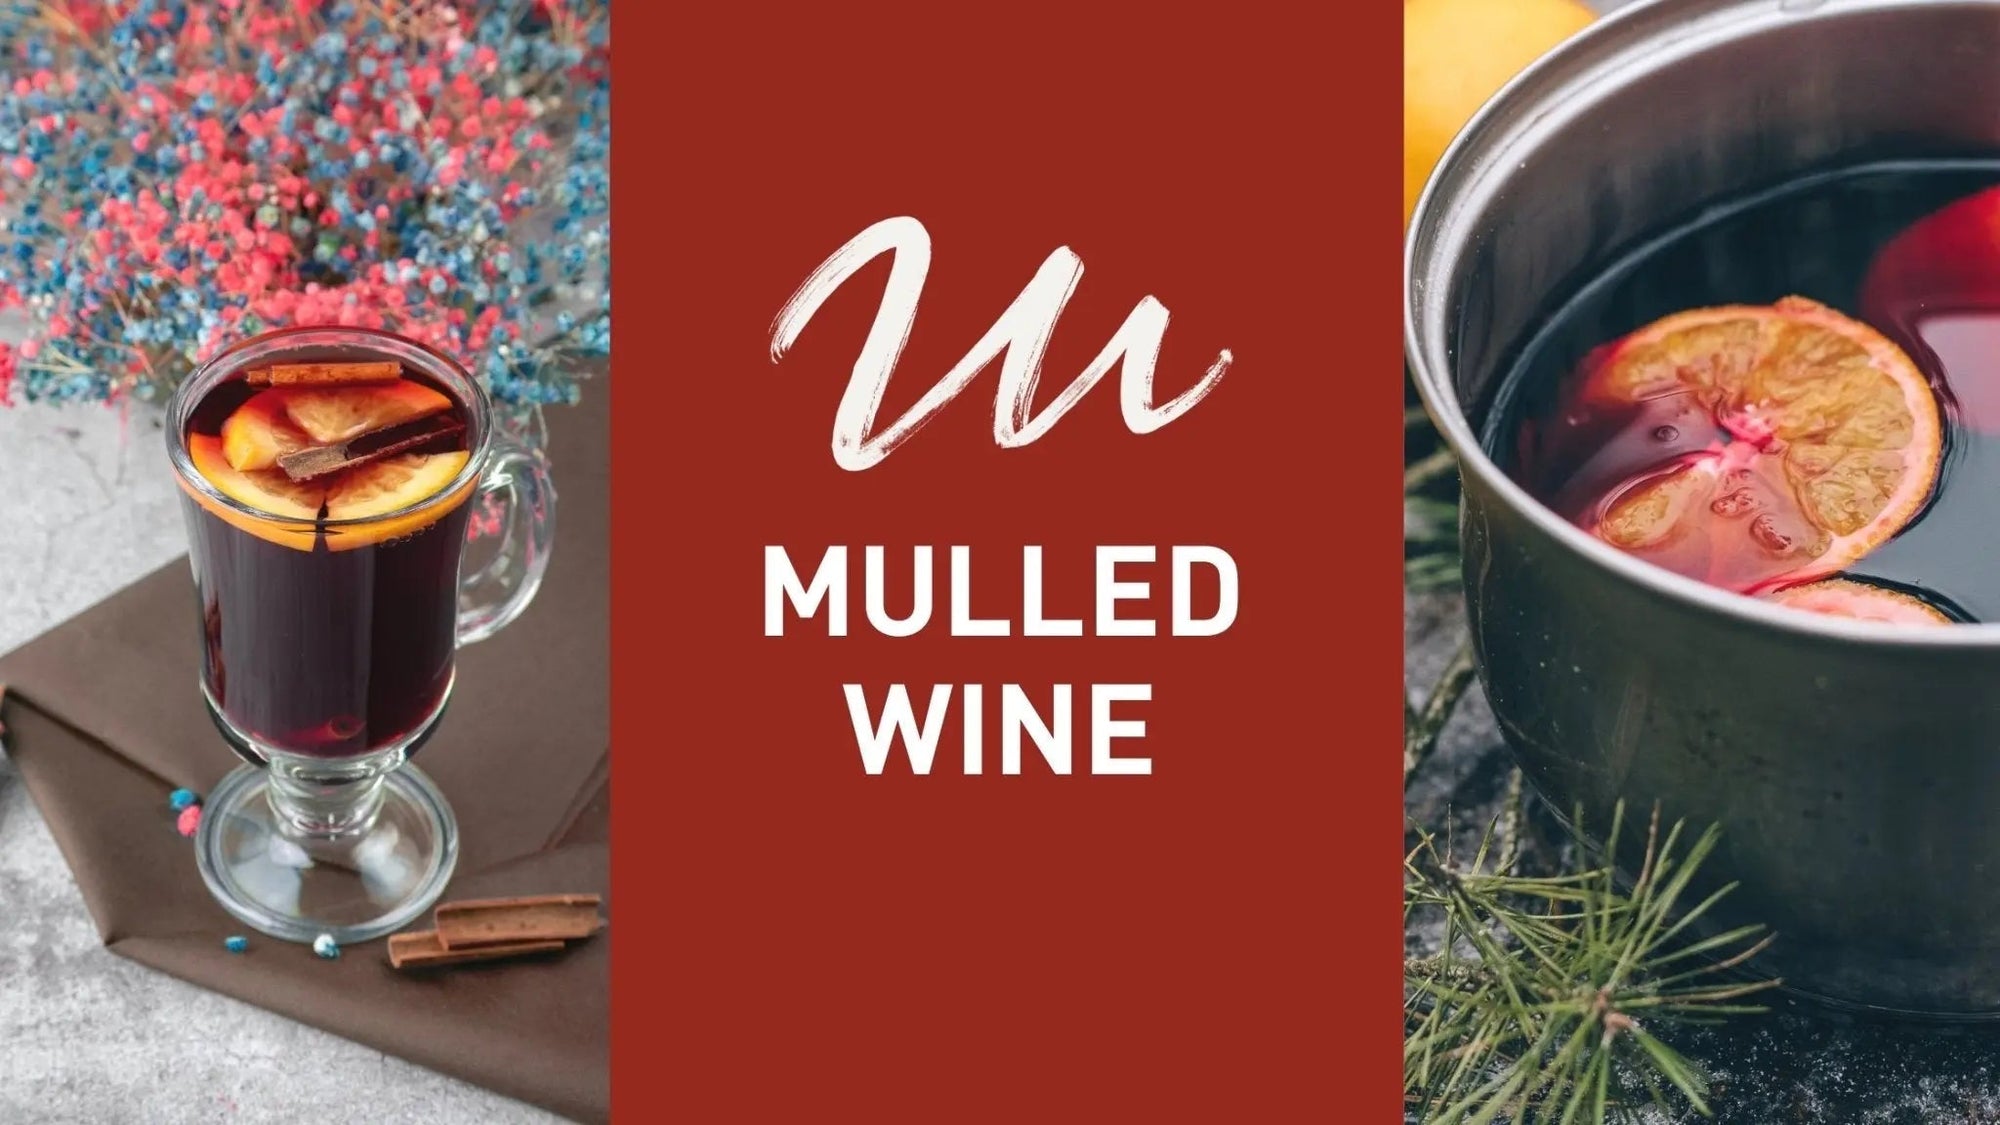 Easter Edition: Mulled Wine - Millon Wines